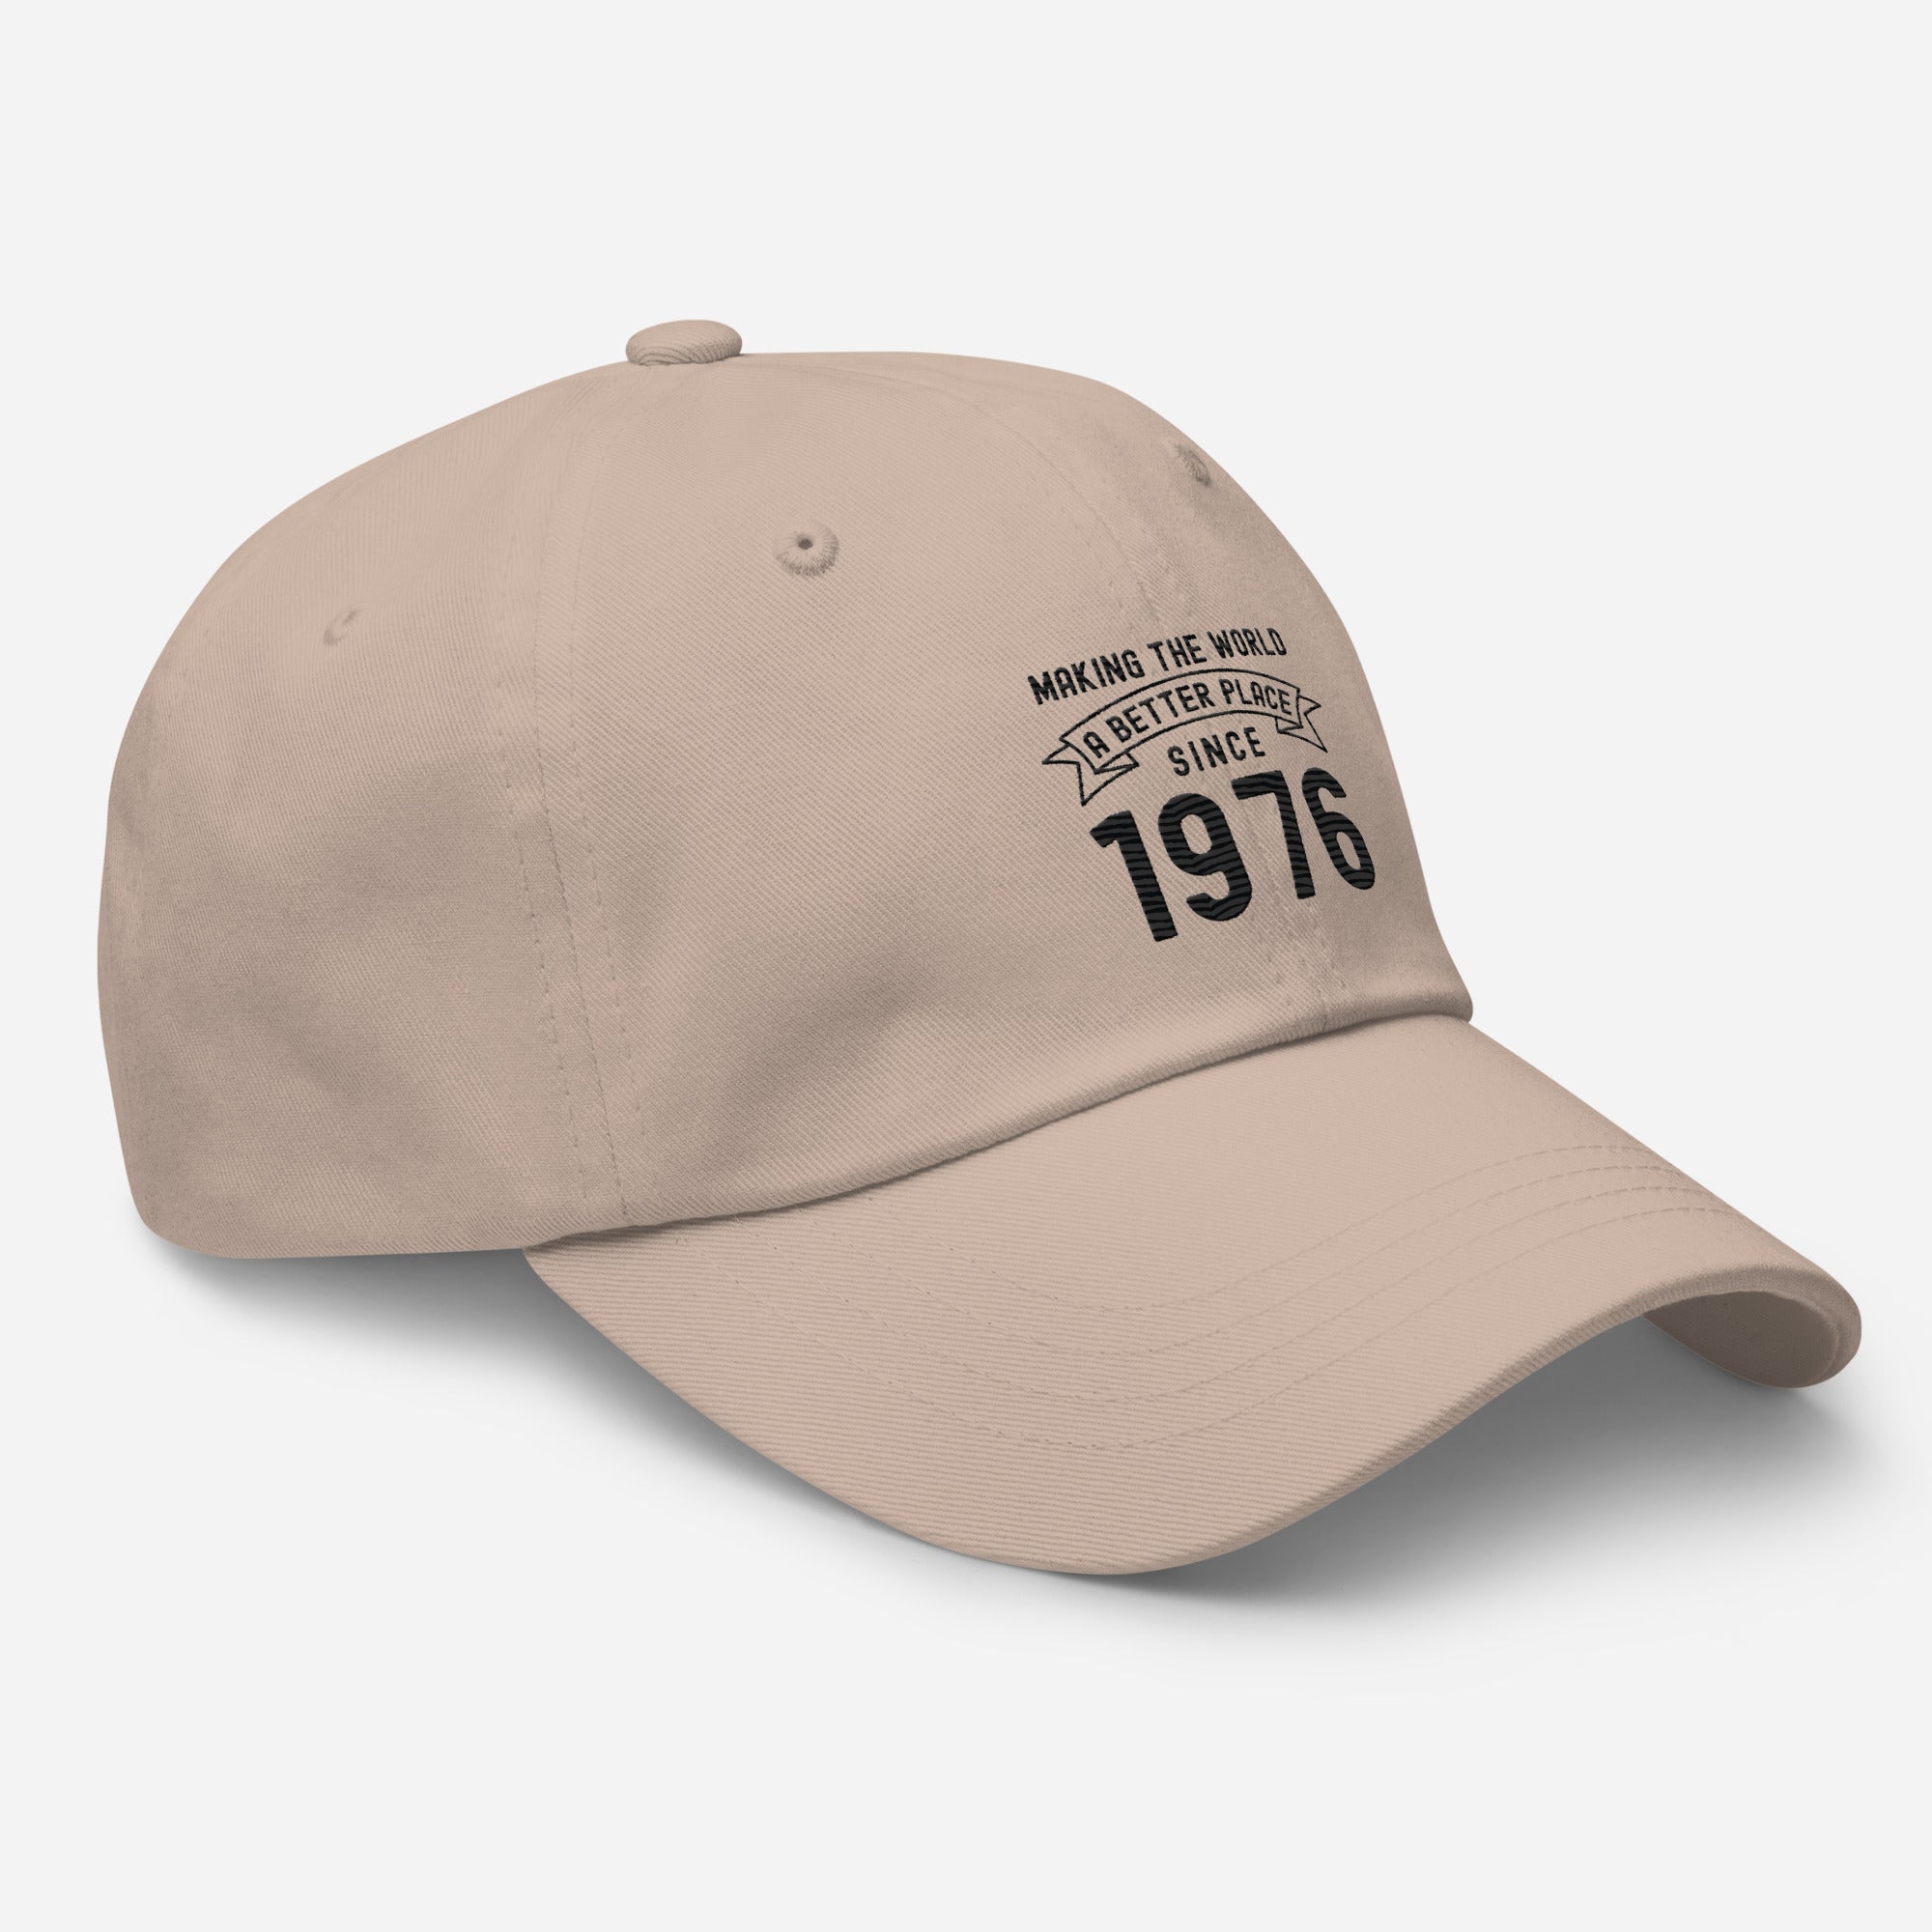 Hat | Making the world a better place since 1976